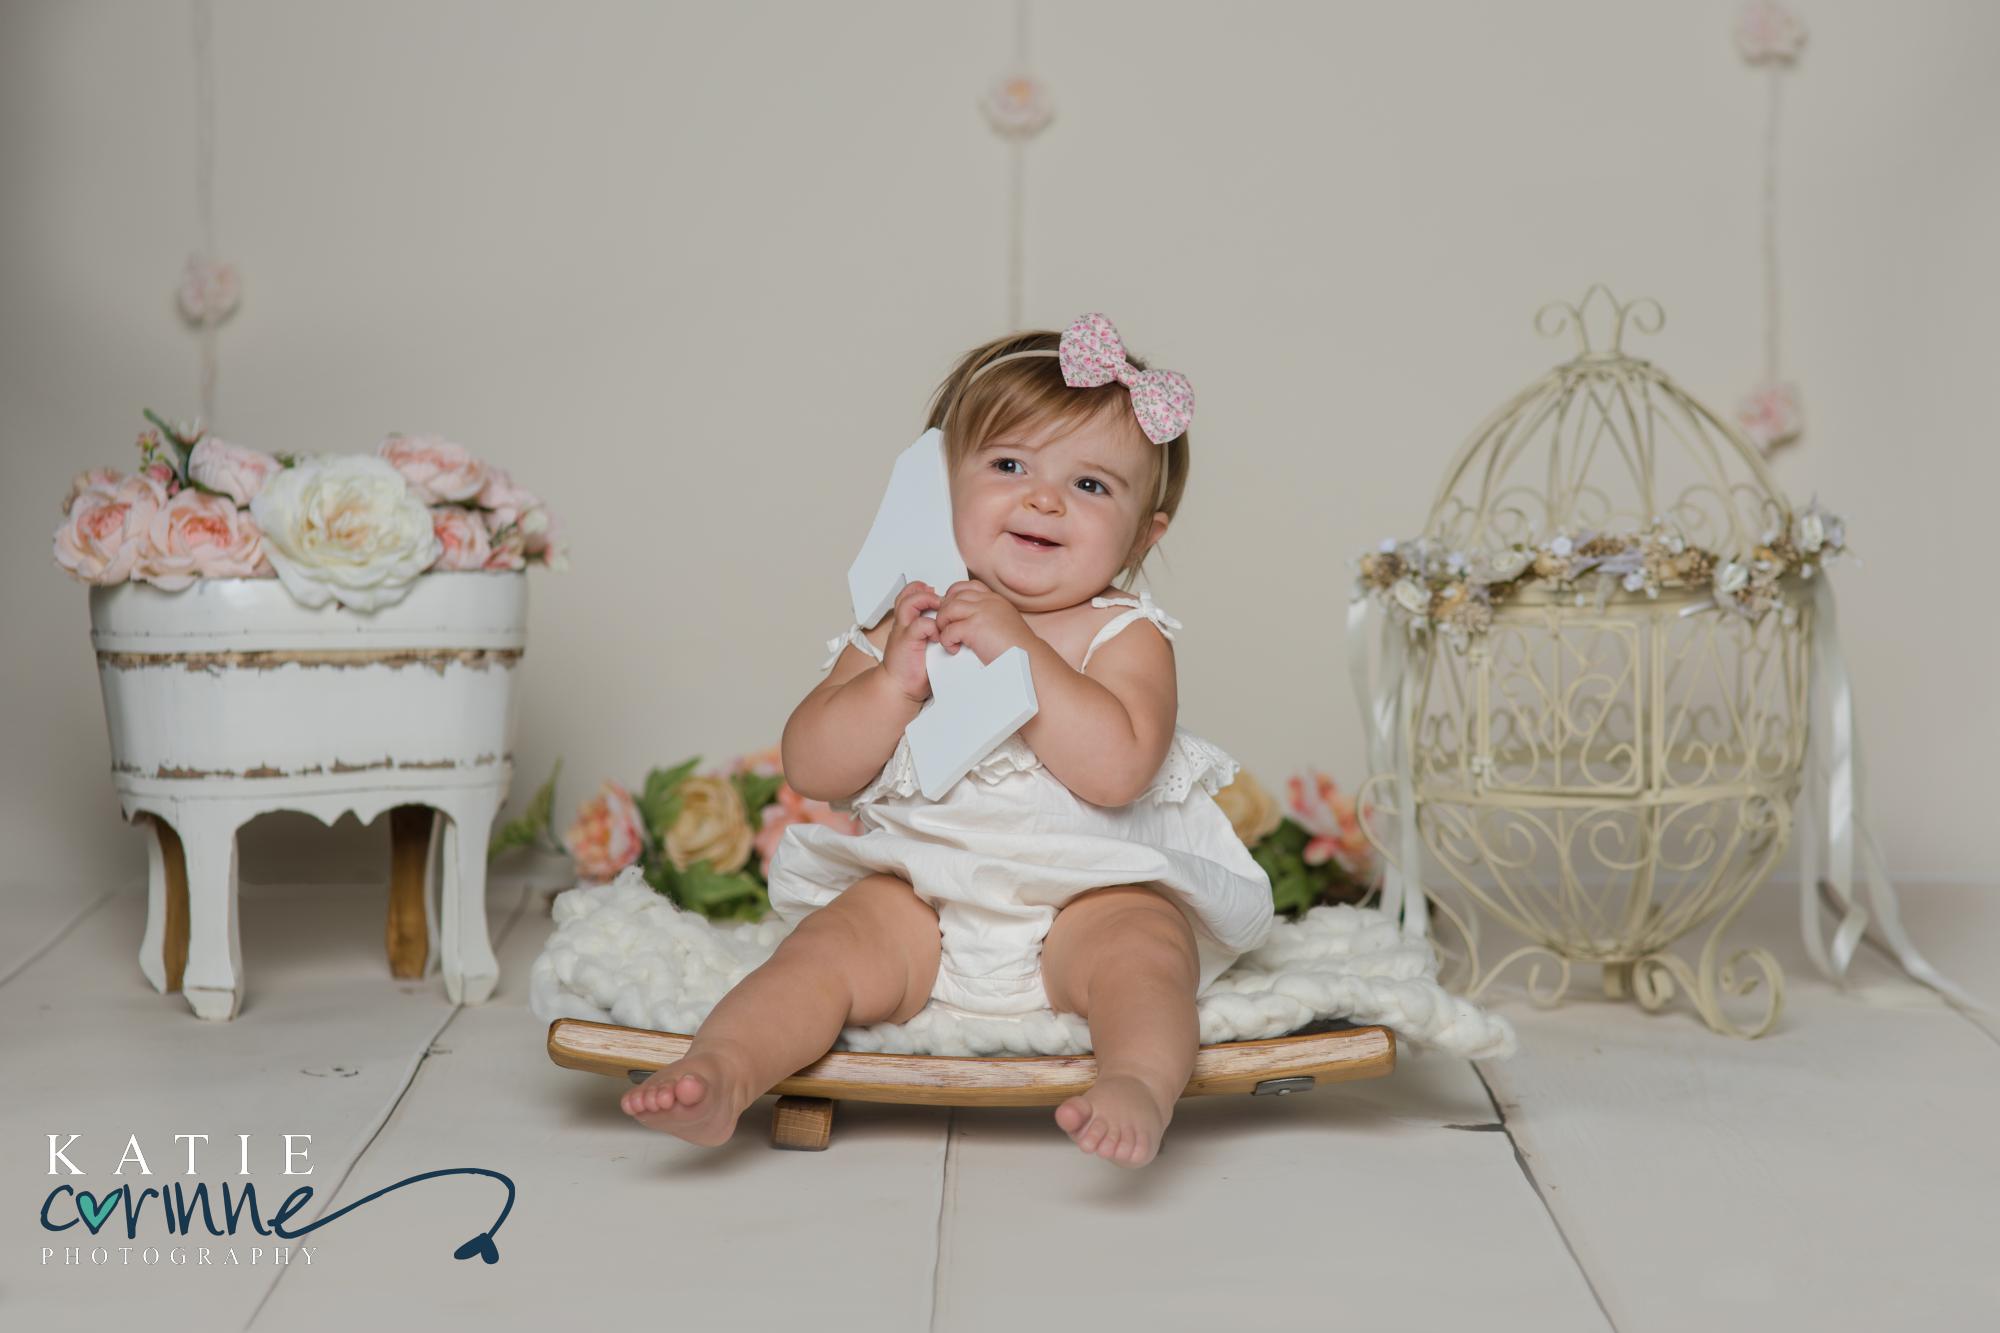 Beautiful one year old baby girl photo session